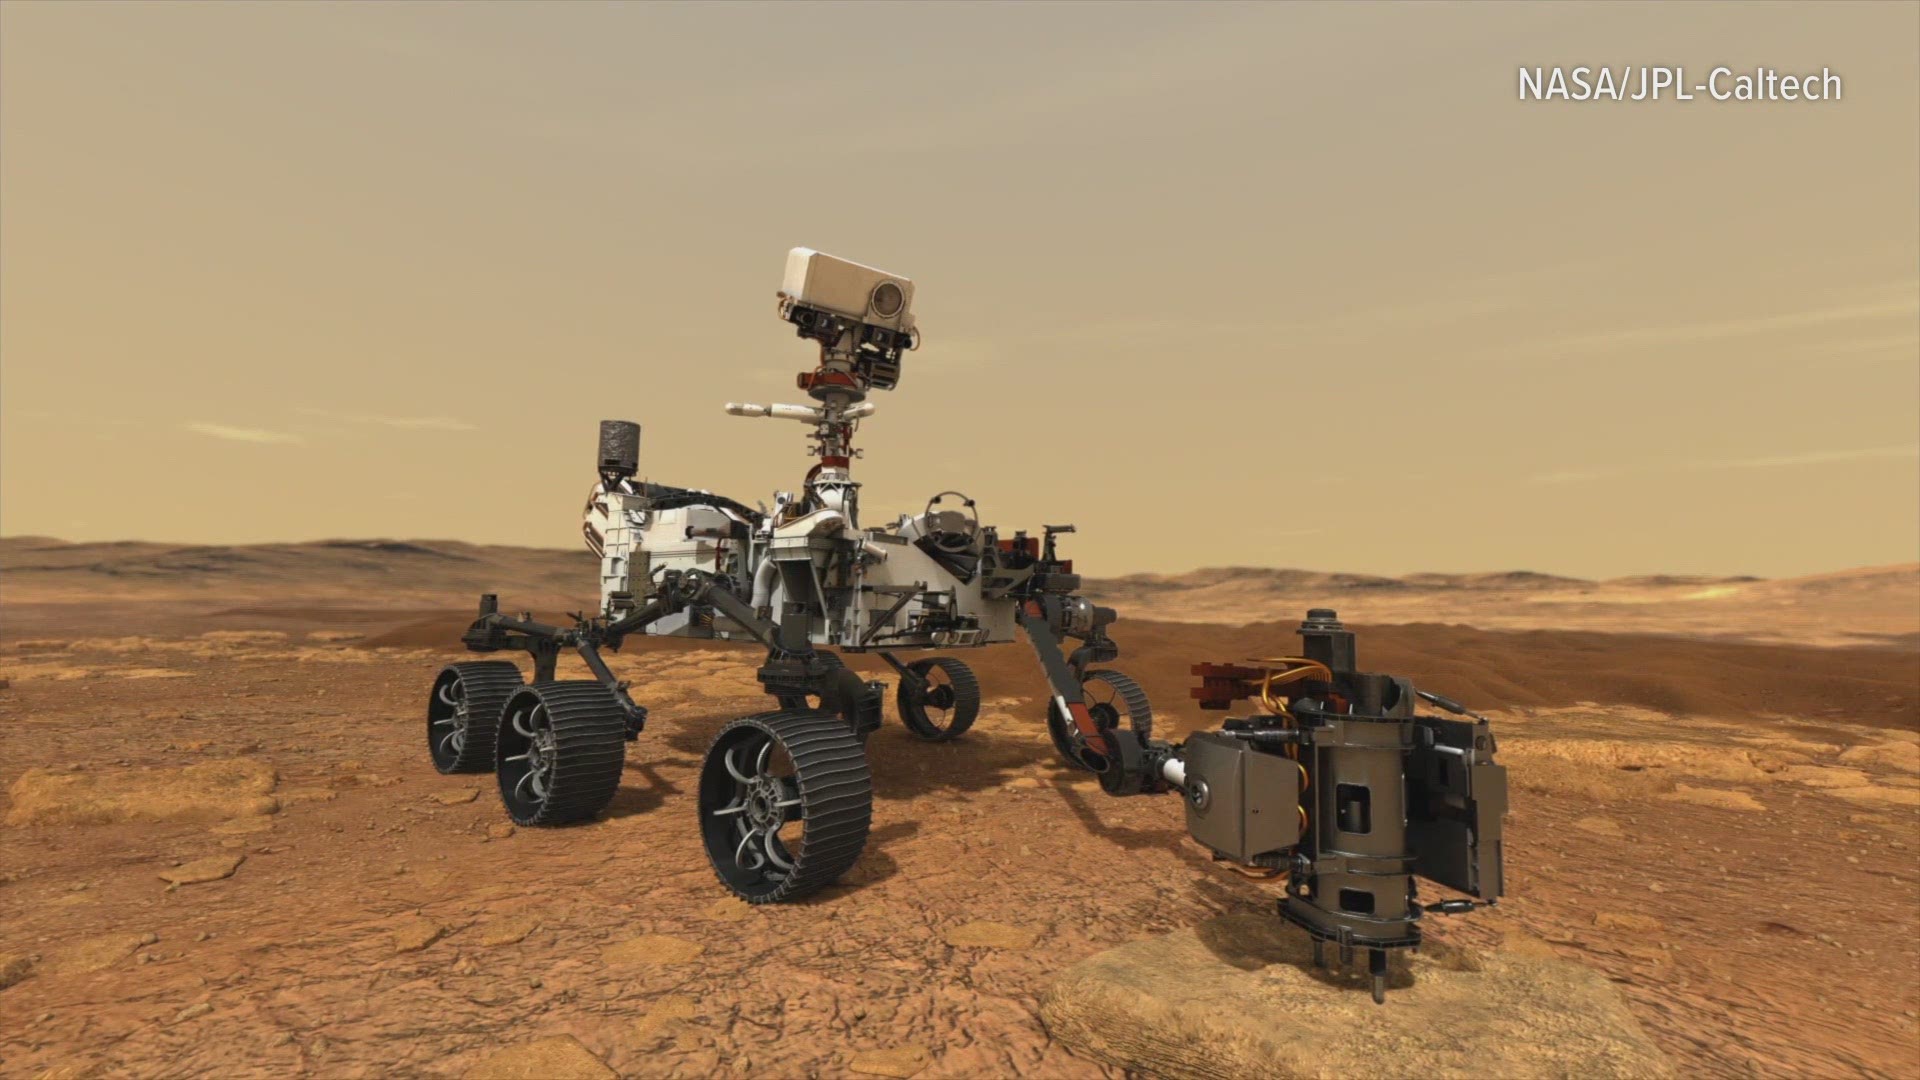 NASA's Perseverance Mars Rover likely wouldn't be having the success its having on the Red Planet if it was not enabled by parts designed in Norton Shores, Mich.